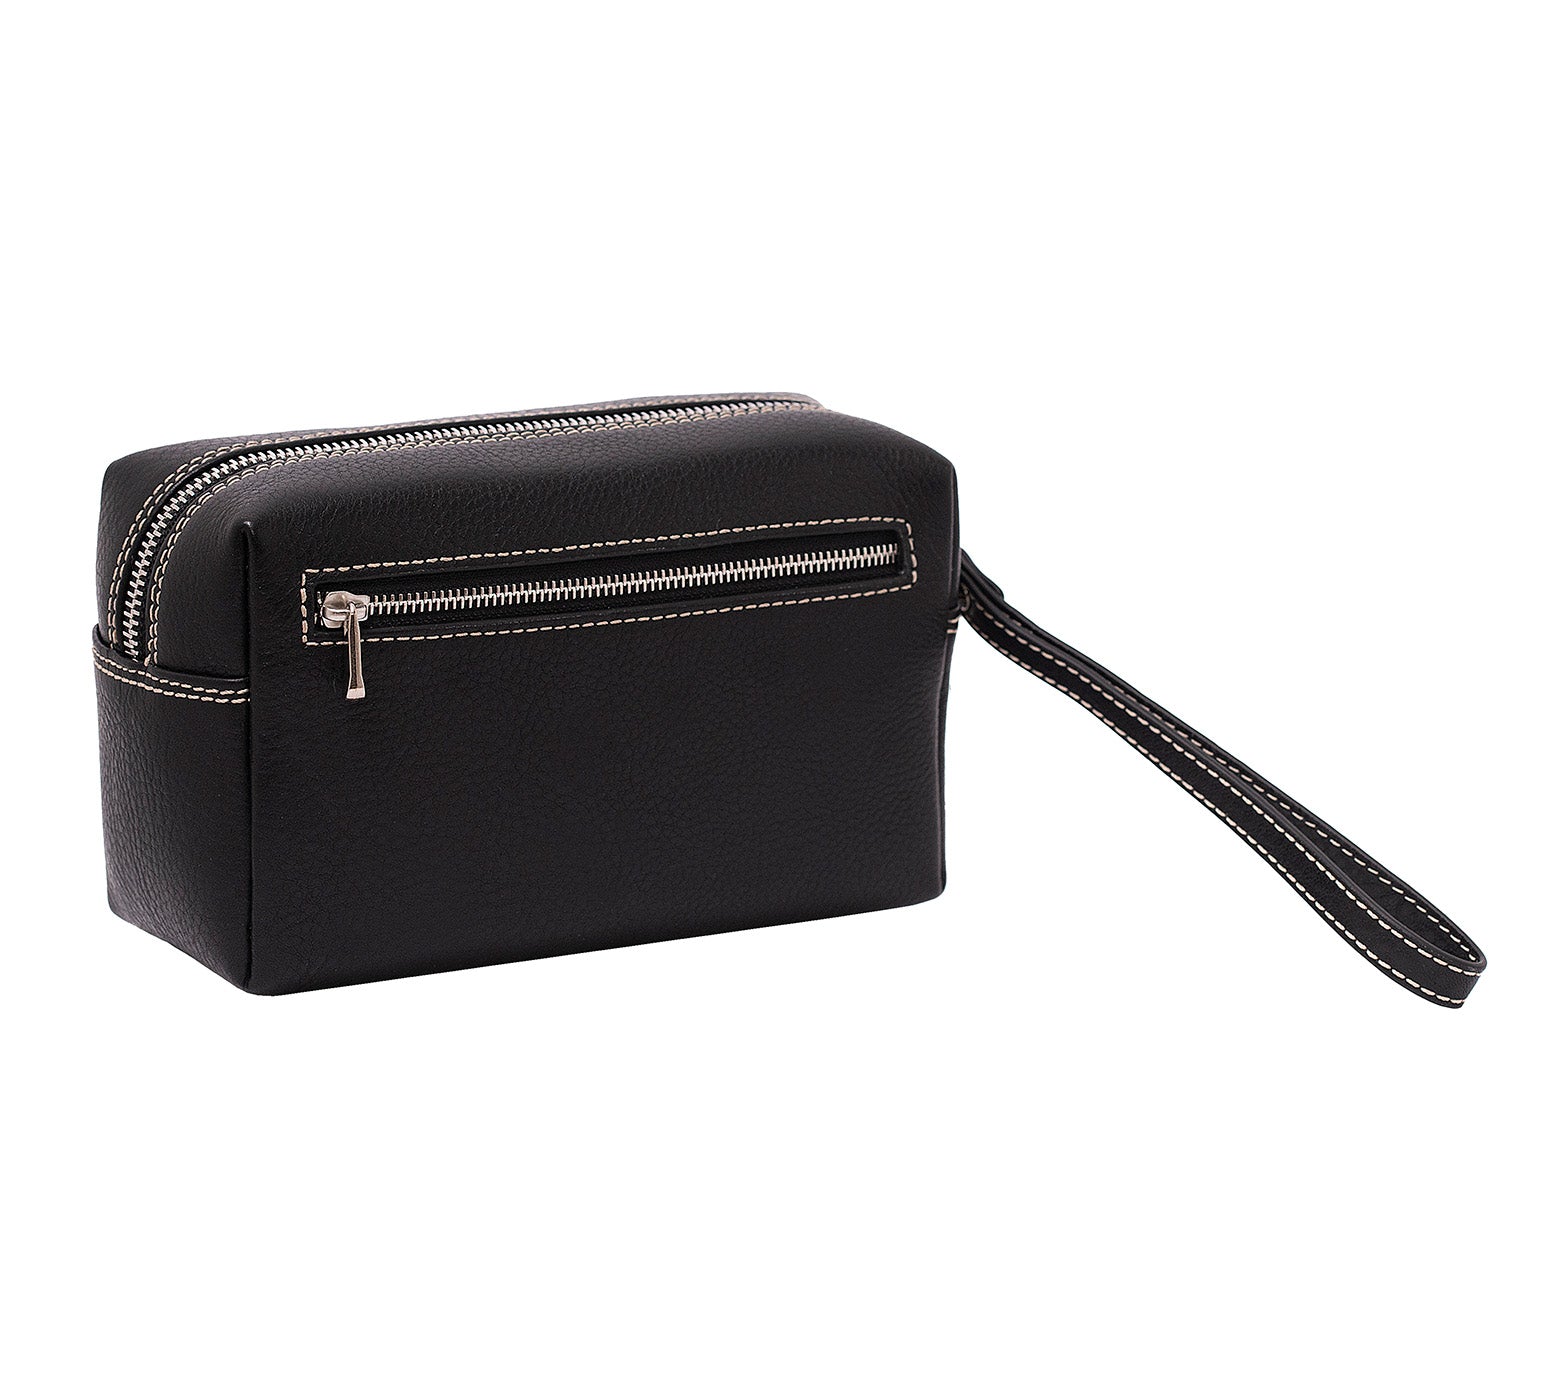 Leather Wrist Bag from Rydal in 'Black' showing reverse.